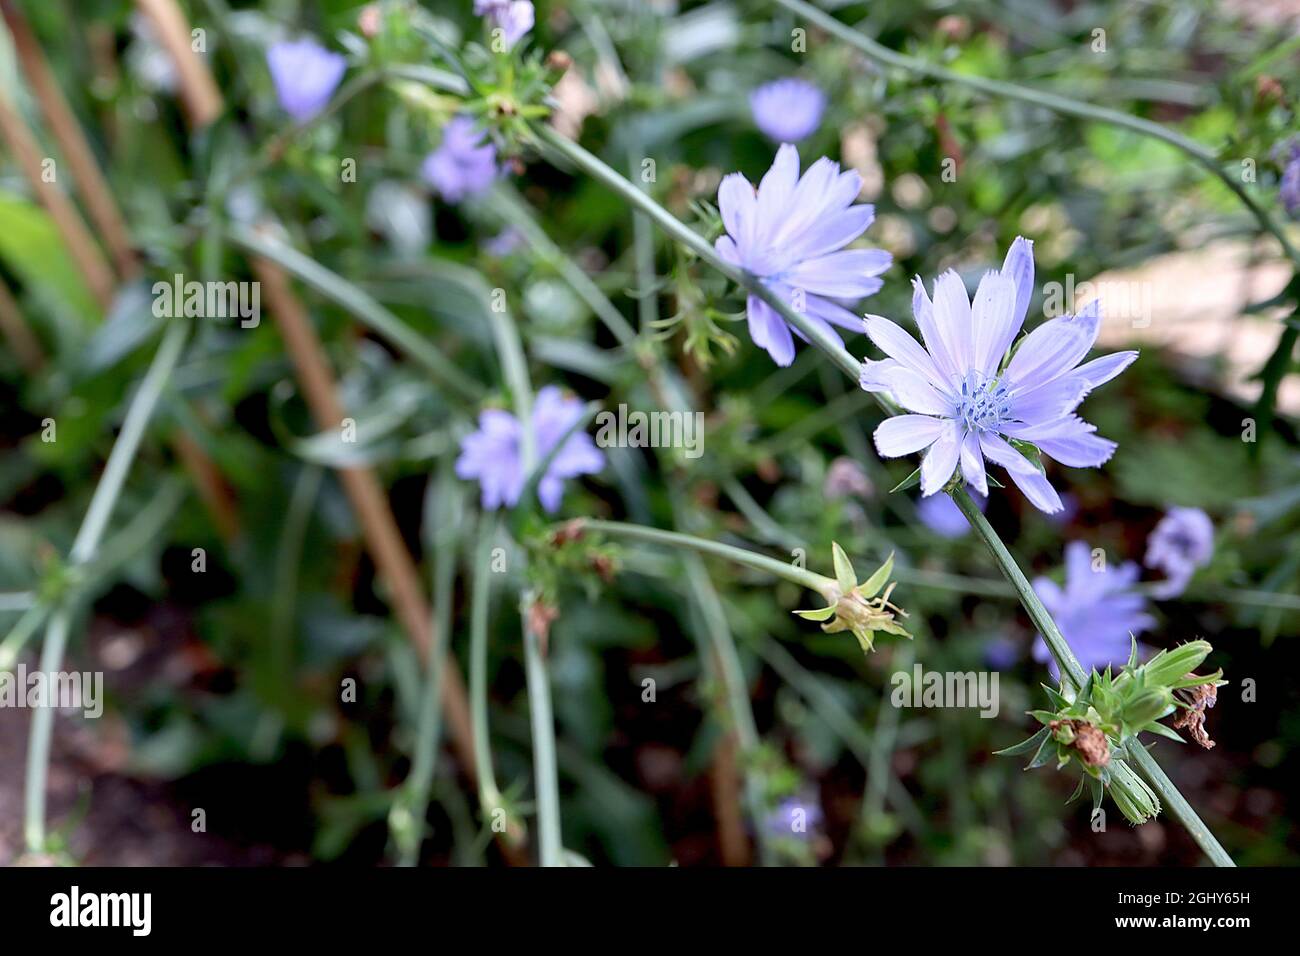 Cichorium intybus ‘Electric Blue’ chicory Electric Blue – lavender blue flowers with paintbrush-like petals on long stems, August, England, UK Stock Photo